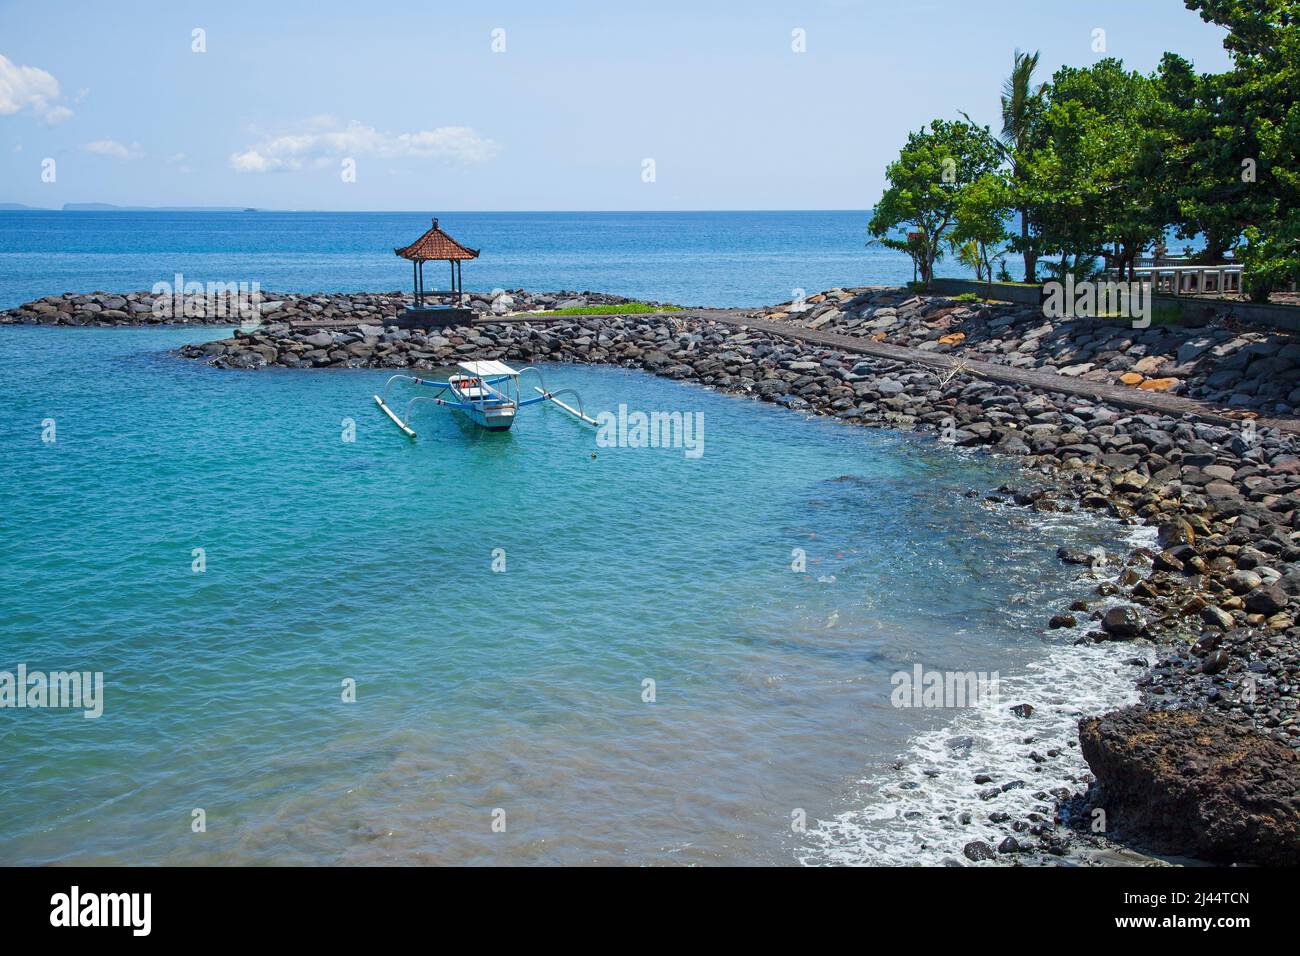 Boats at Candidasa Beach in East Bali, Indonesia. Stock Photo